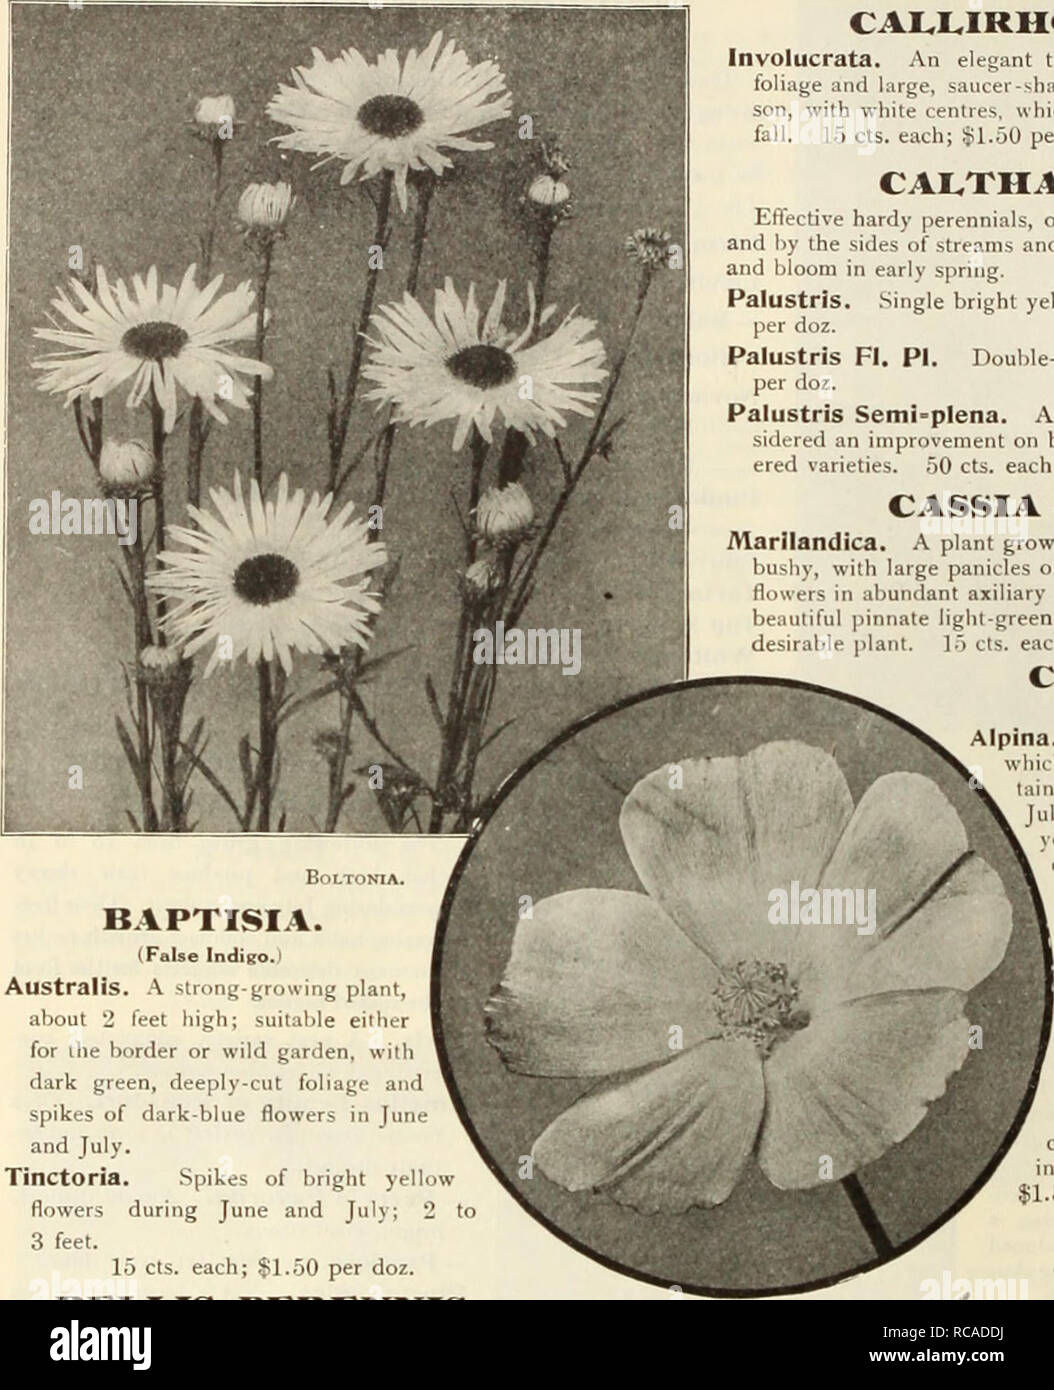 . Dreer's garden book : seventy-sixth annual edition 1914. Seeds Catalogs; Nursery stock Catalogs; Gardening Equipment and supplies Catalogs; Flowers Seeds Catalogs; Vegetables Seeds Catalogs; Fruit Seeds Catalogs. CAL,]L,IRMO£ (Poppy Mallow). Involucrata. An elegant trailing plant, with fniely-divided foliage and large, saucer-shaped tlowt-is of hright rosy-crim- son, with white centres, which are produced all summer and fall. 15 cts. each; $1.50 per doz.; $10.00 per 100. CAL,THA (Marsh Marigold). Effective hardy perennials, of much value in marshy places and by the sides of streams and ponds Stock Photo